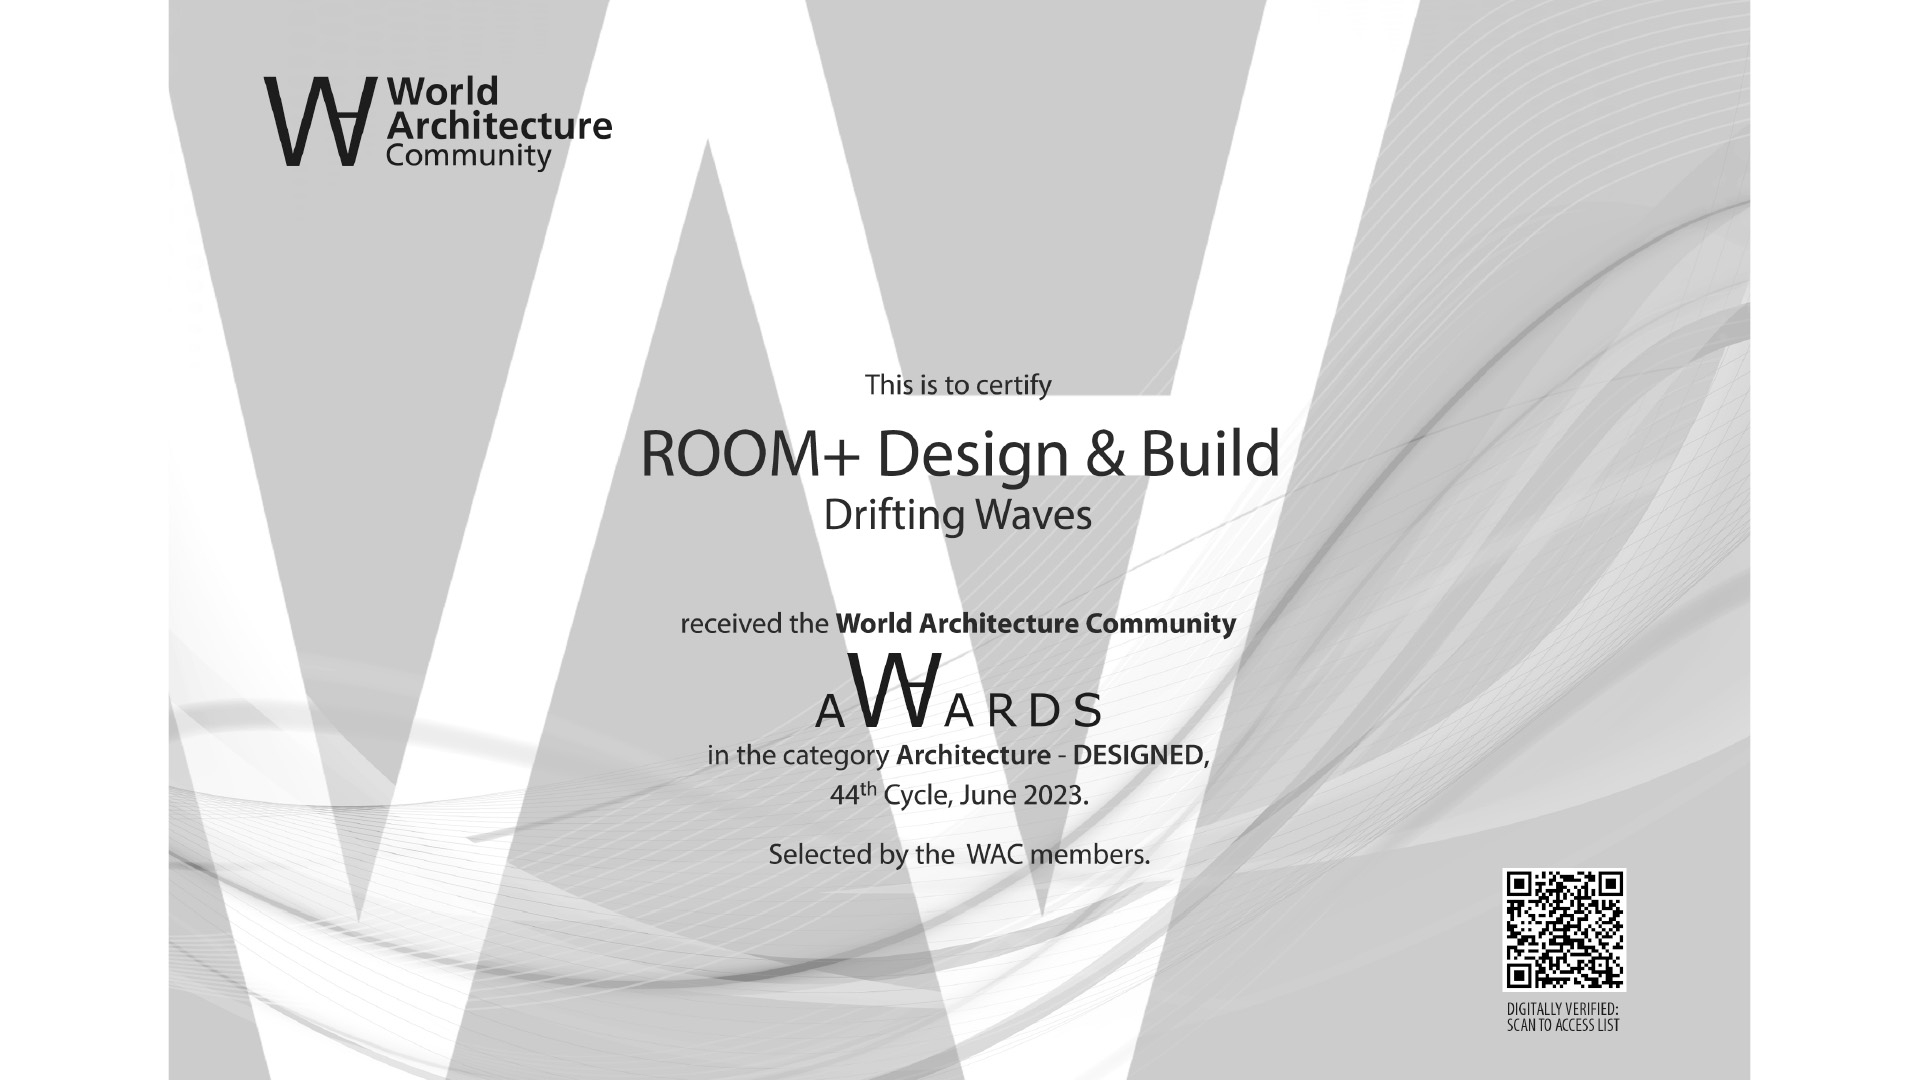 Awards world architecture - Drifting waves 44th - 01